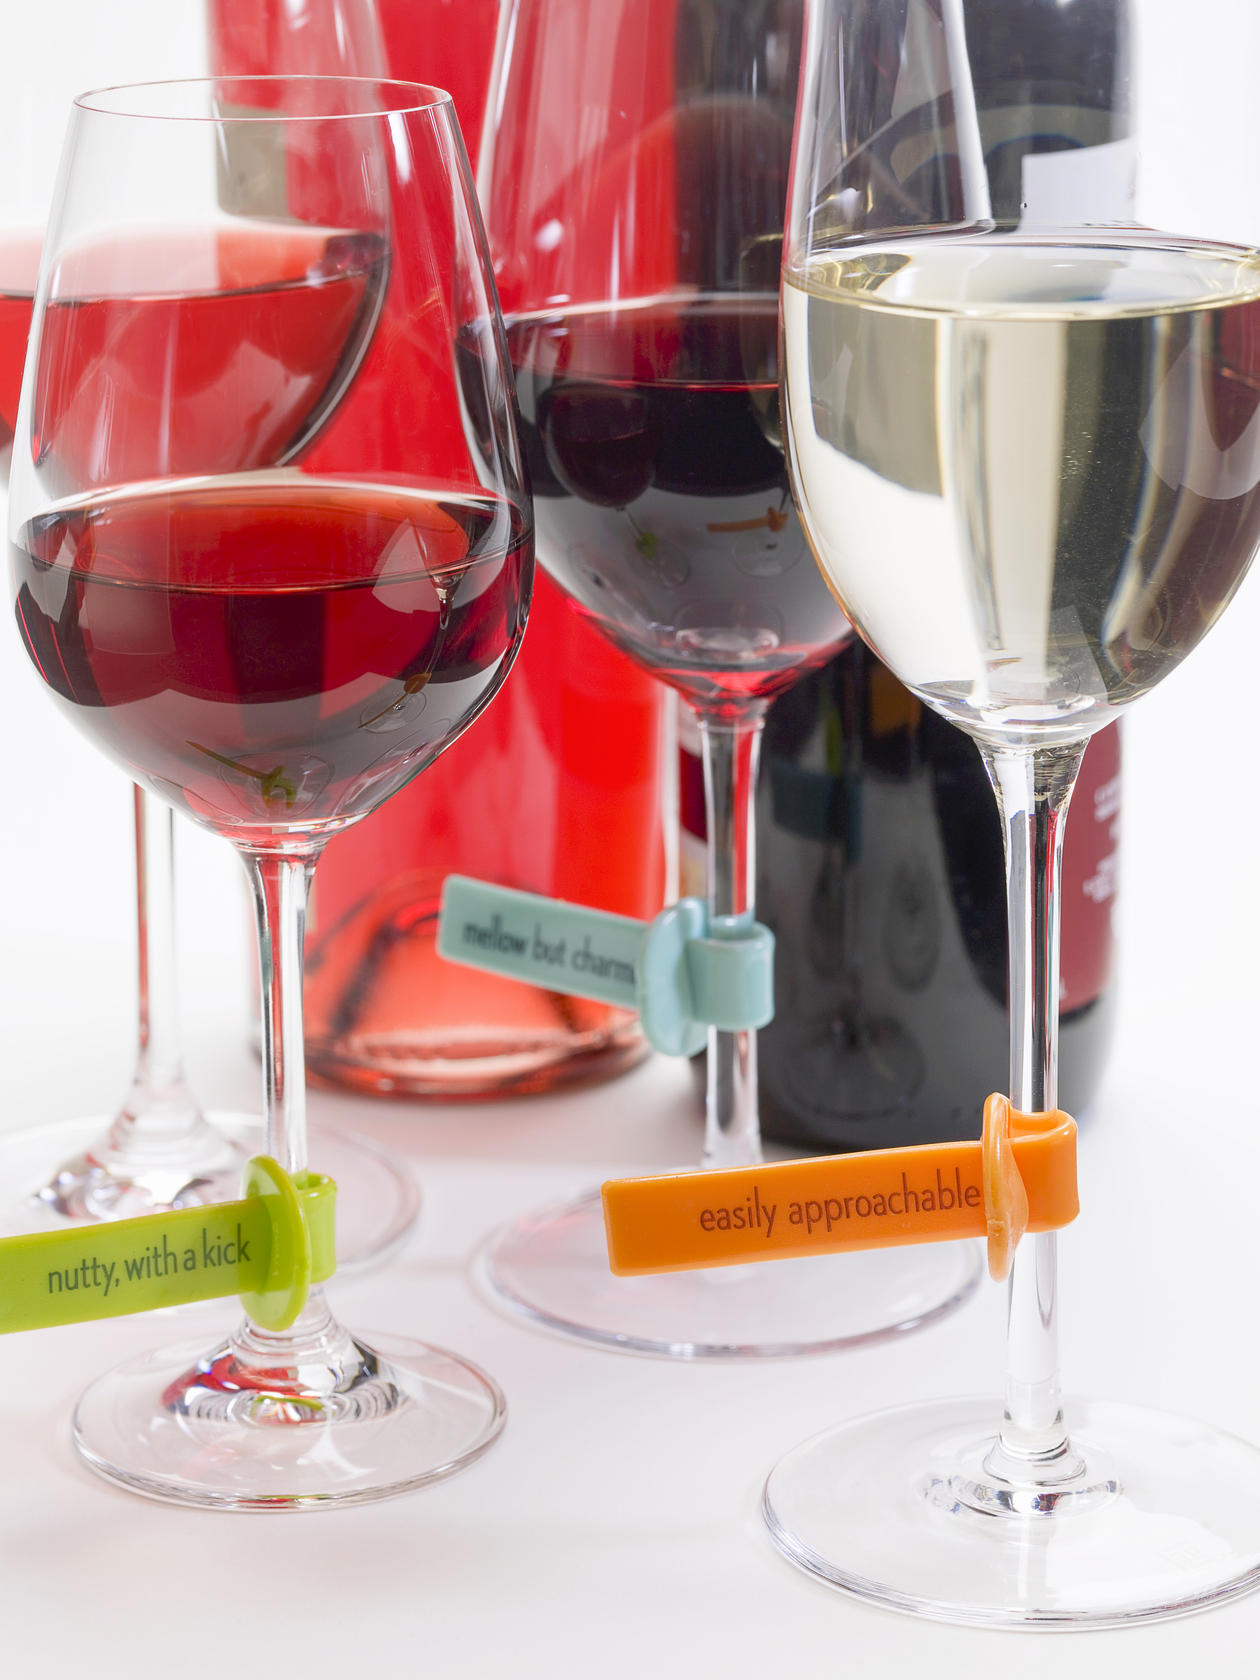 Wines have models, and these can aid tasting. Photo: Corbis